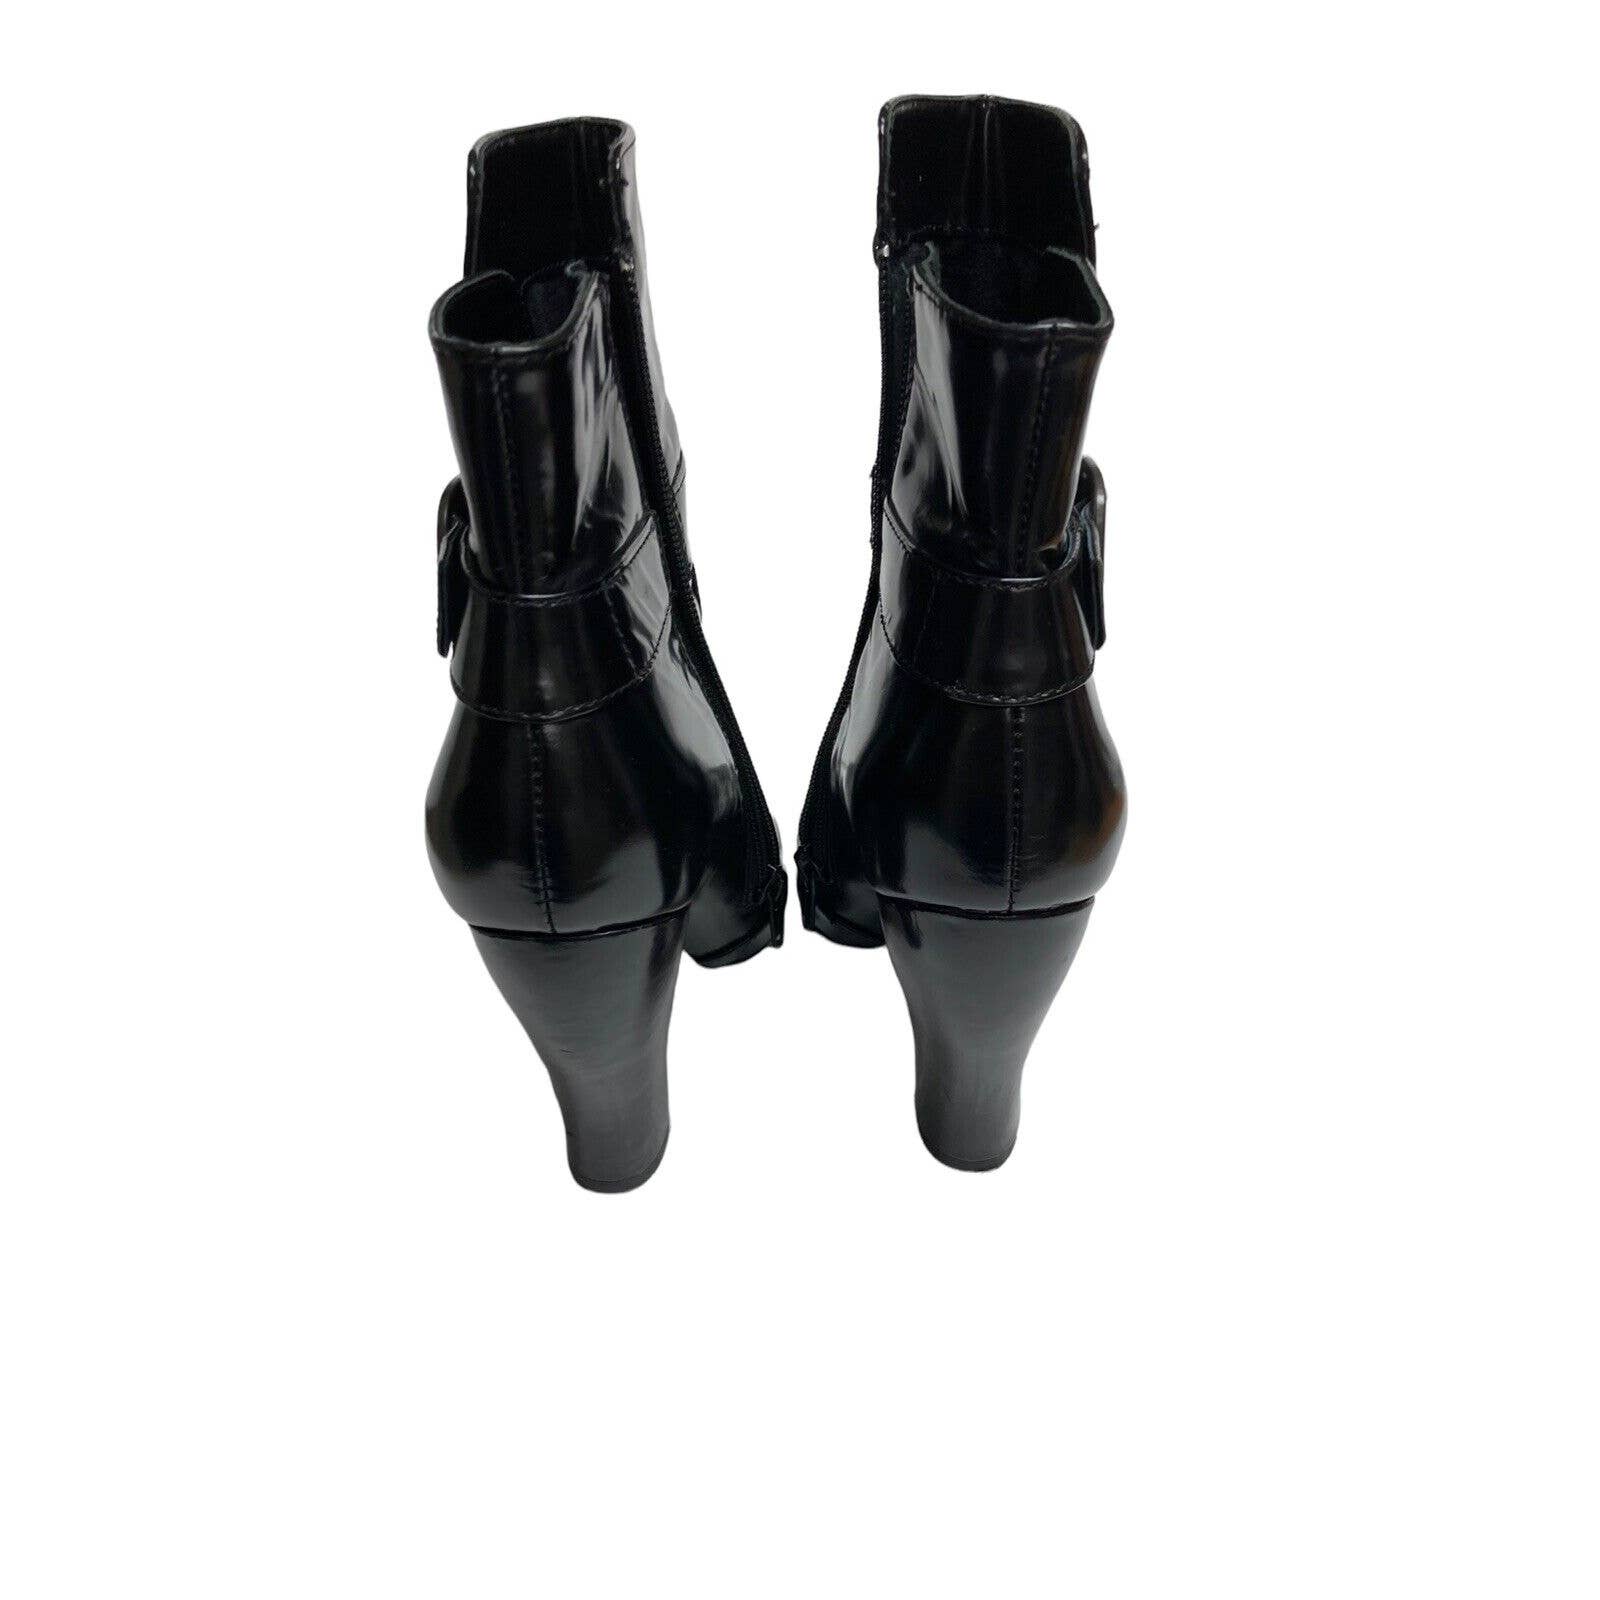 Black Leather Boots For Women | Not Your Grandma's Vintage & More